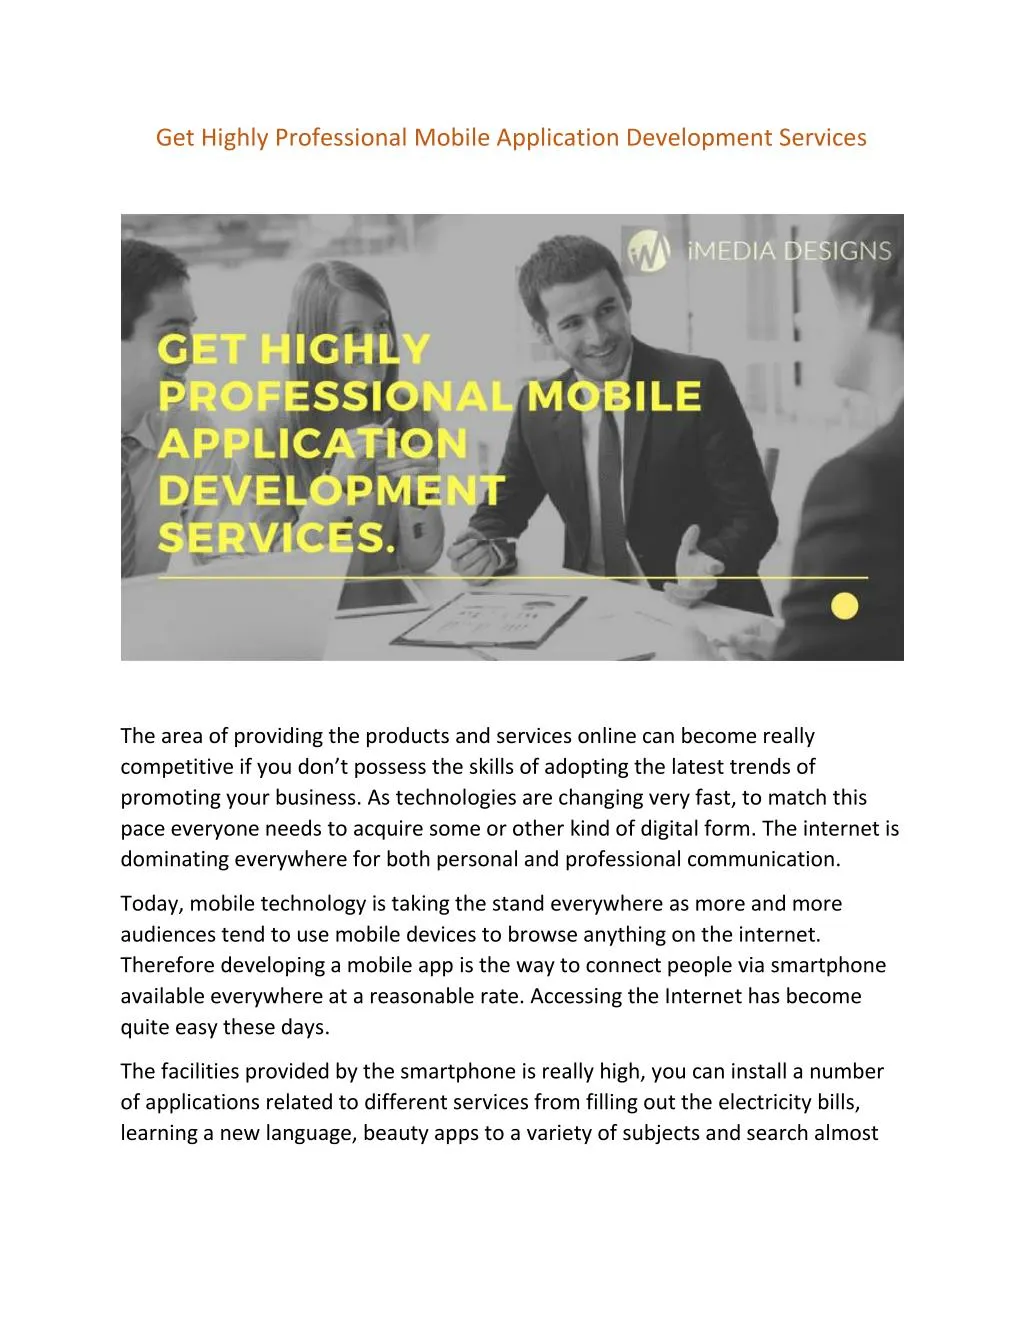 get highly professional mobile application